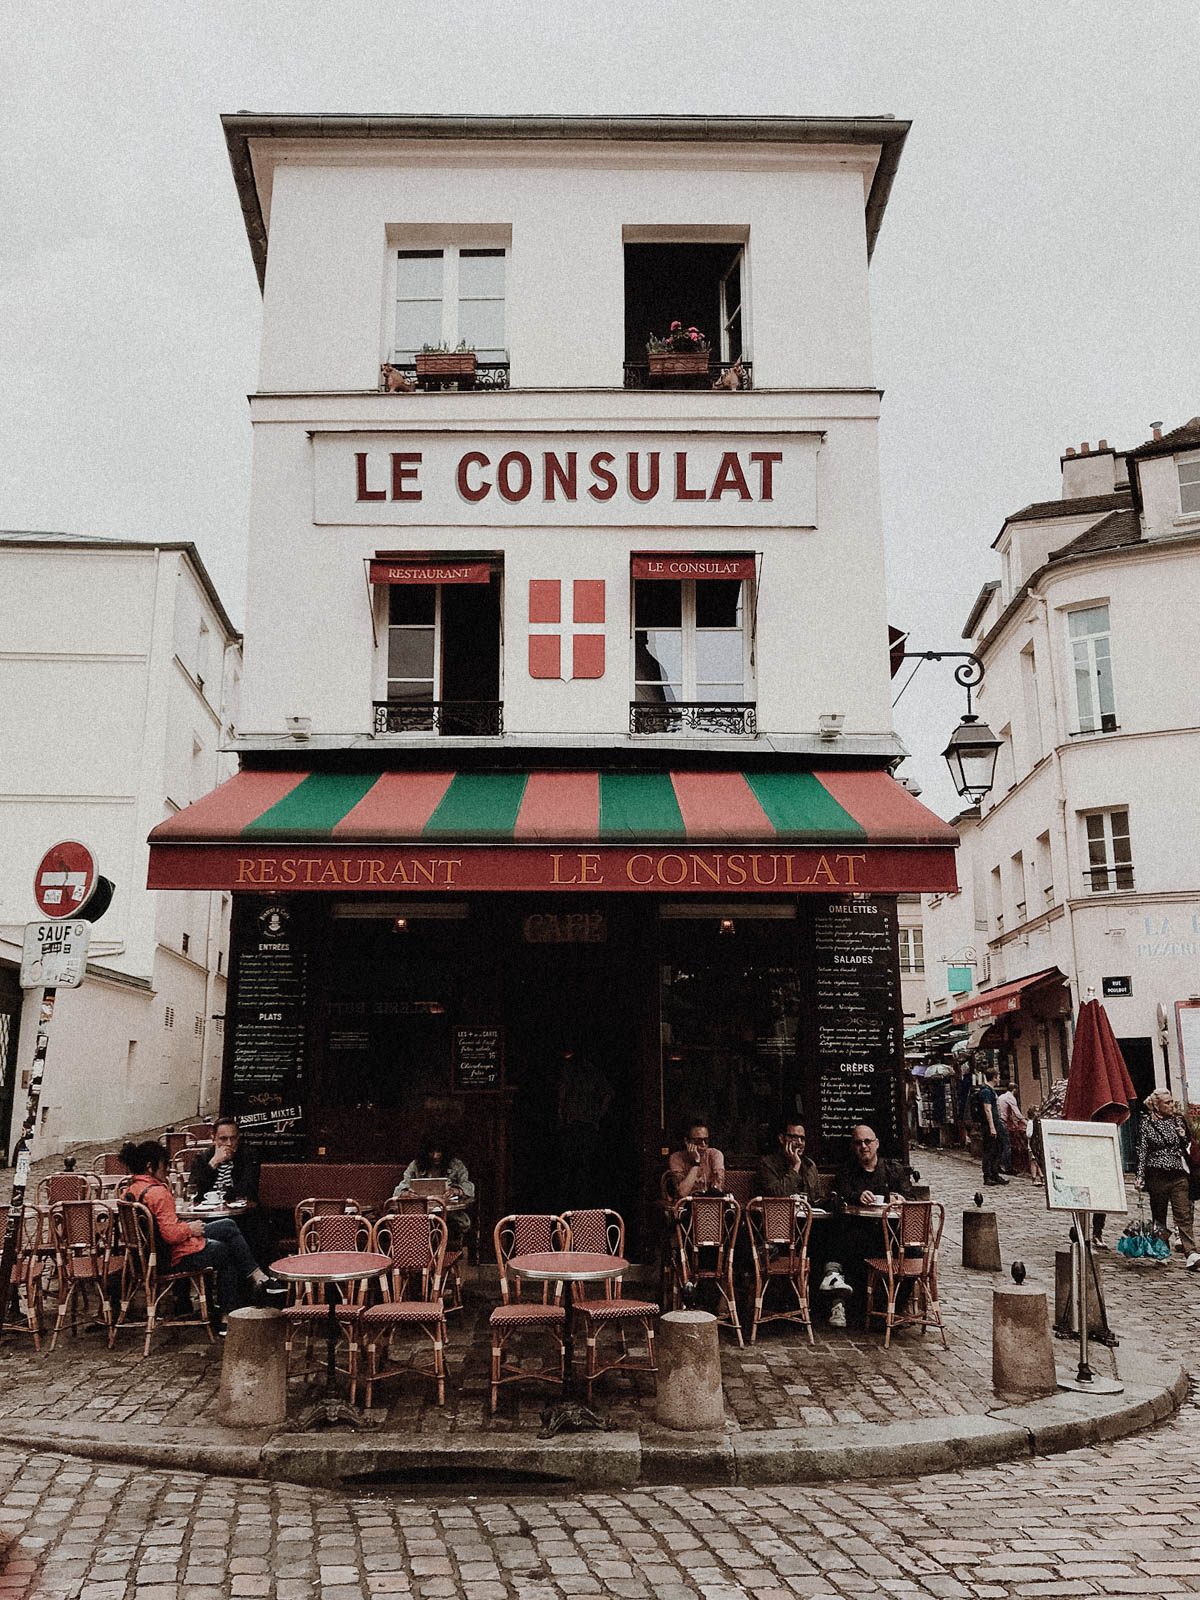 Paris France Travel Guide - Le Consulat French Cafe Restaurant / RG Daily Blog